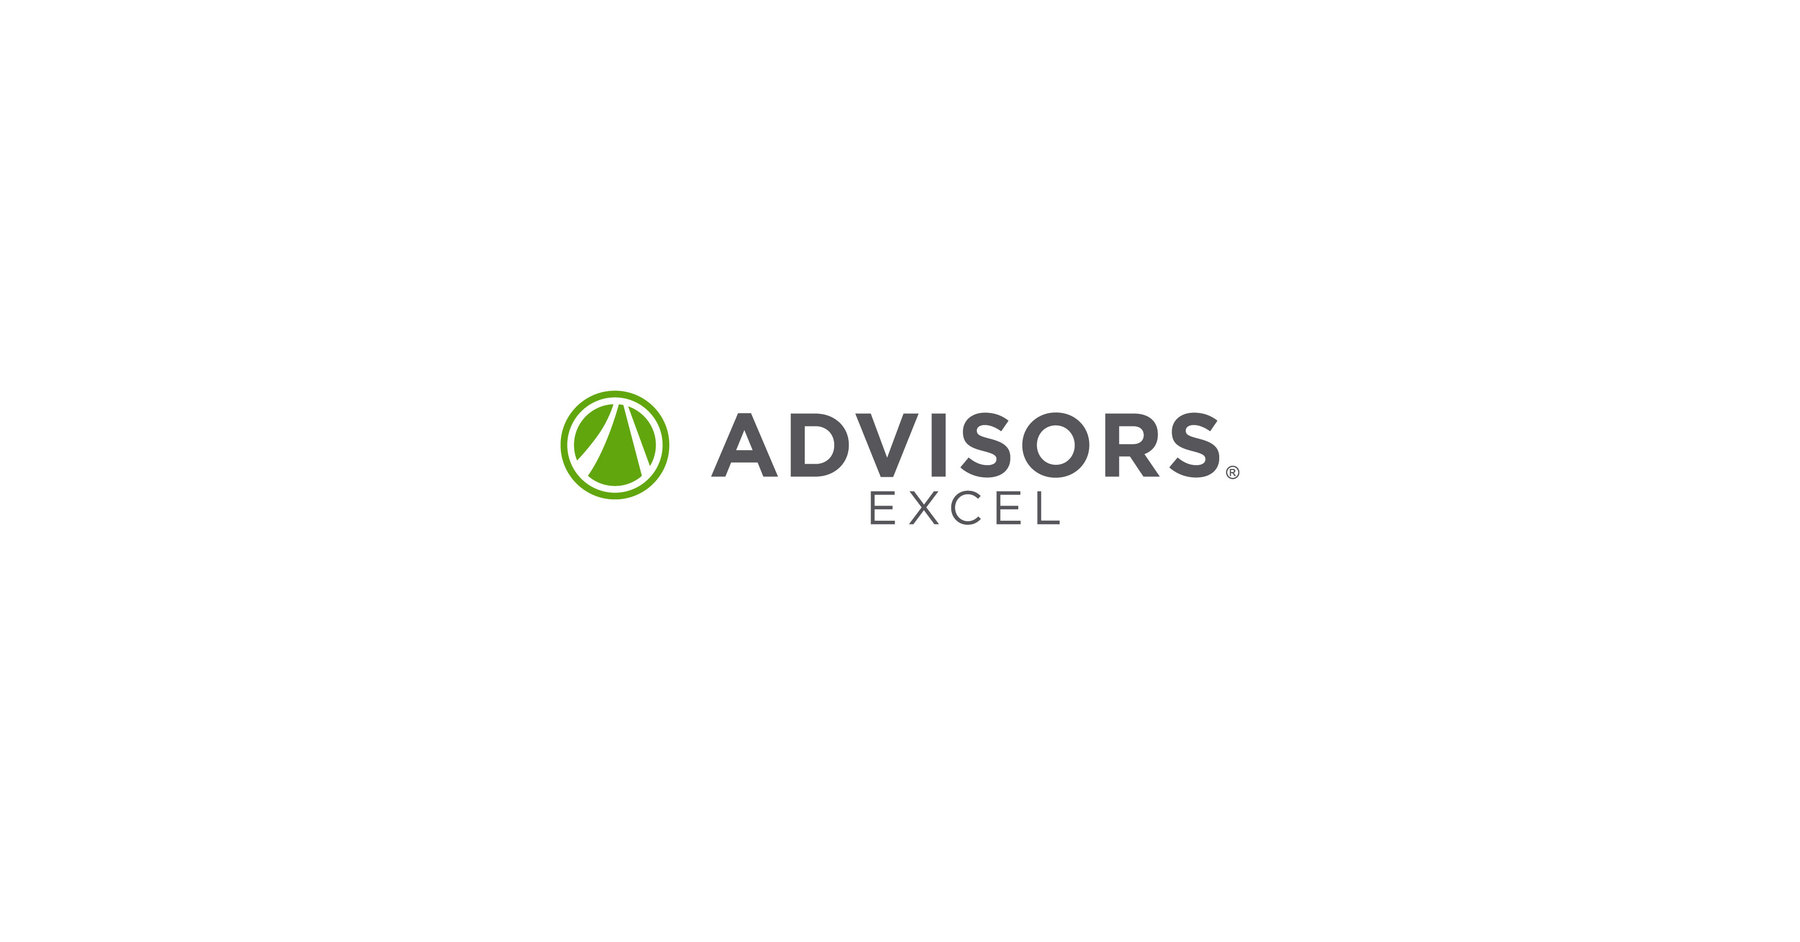 Advisor Internet Marketing Enters Into Strategic Relationship With Advisors Excel to Help Independent Advisors Grow Their Practice With Just An Internet Connection And A Cell Phone